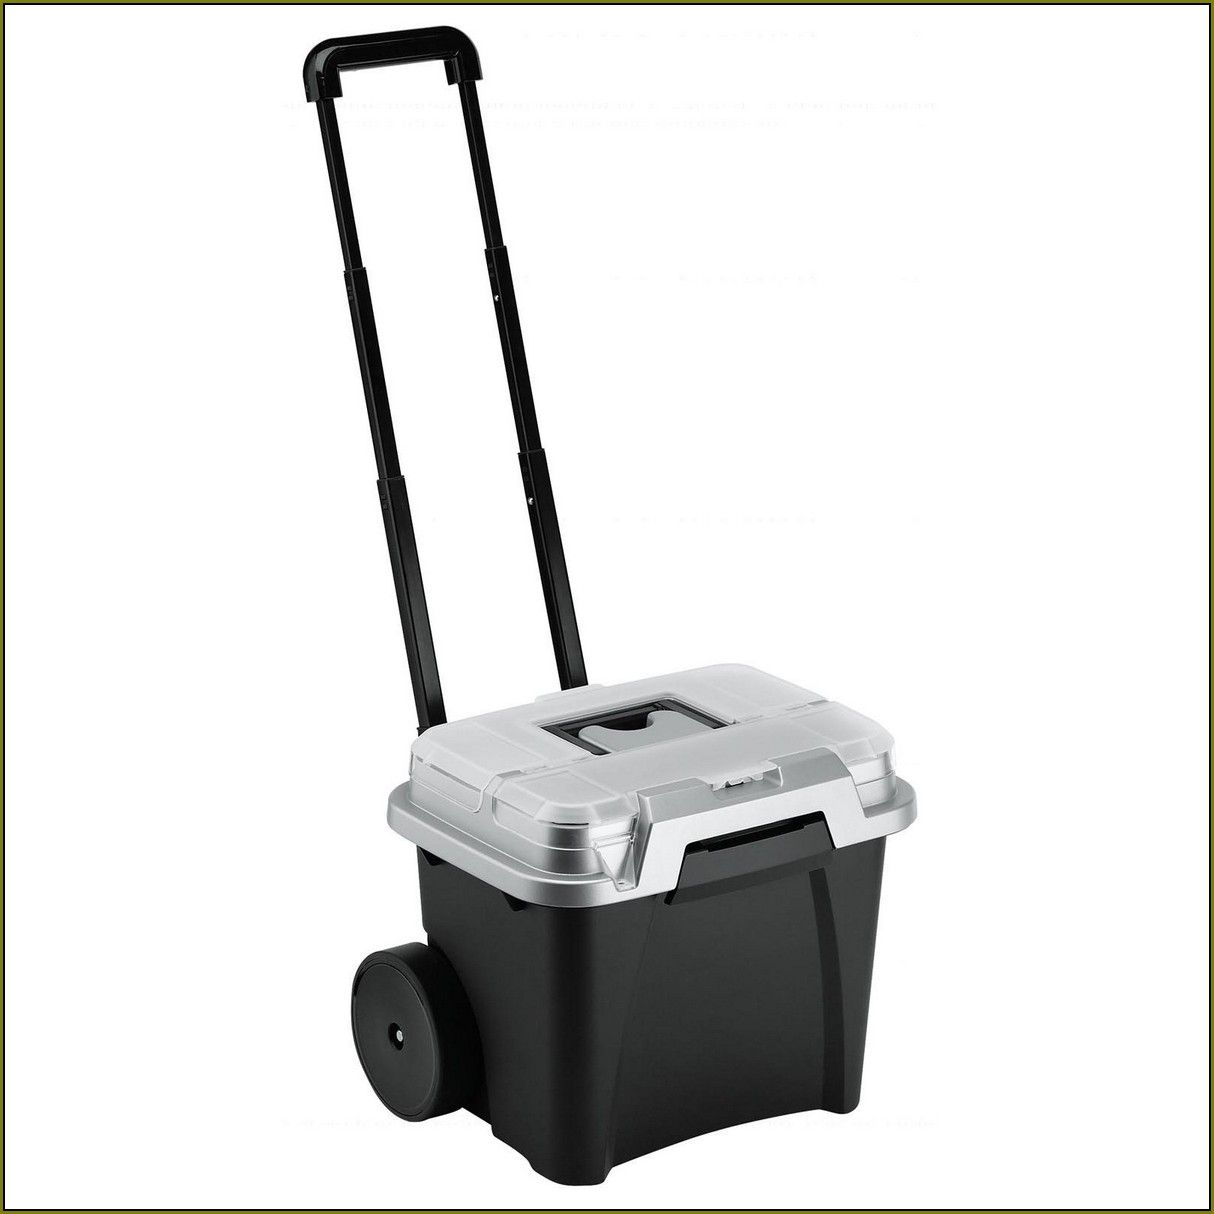 Portable Filing Cabinet On Wheels The Need For Structured Storage regarding measurements 1214 X 1214